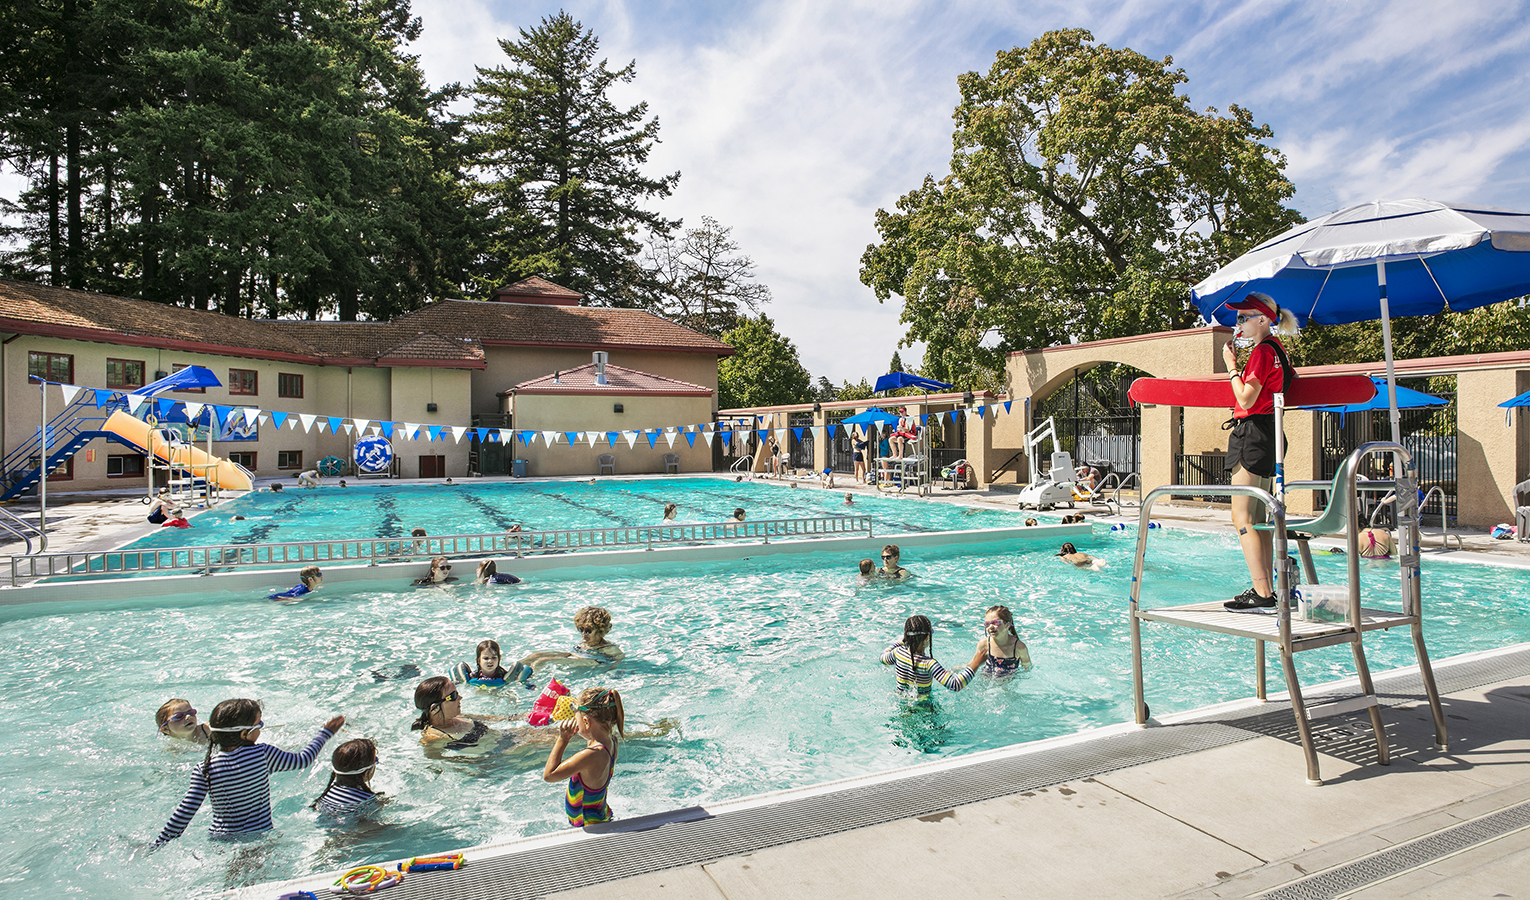 Peninsula Park Pool. A sunny summer's day at a bright blue outdoor pool featuring several children playing in the water while a lifeguard supervises from a tall chair on the pool deck.